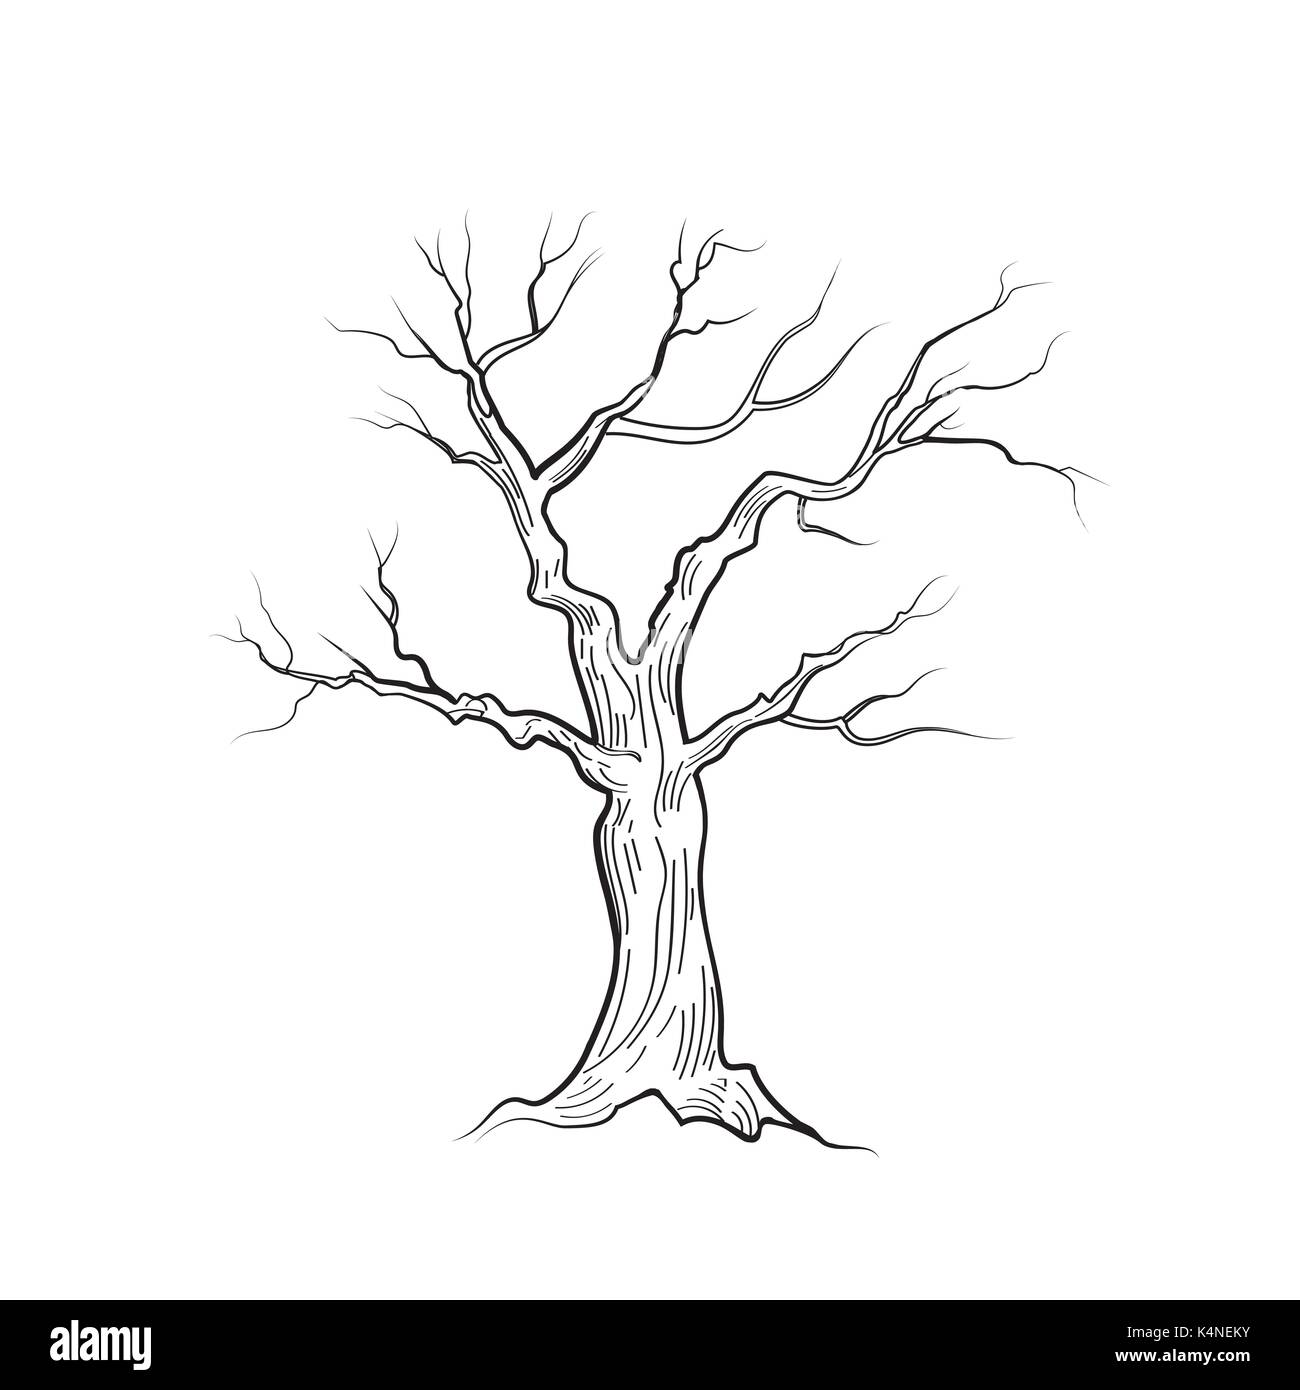 Tree Without Leaves Leaf Vector Images (over 150)